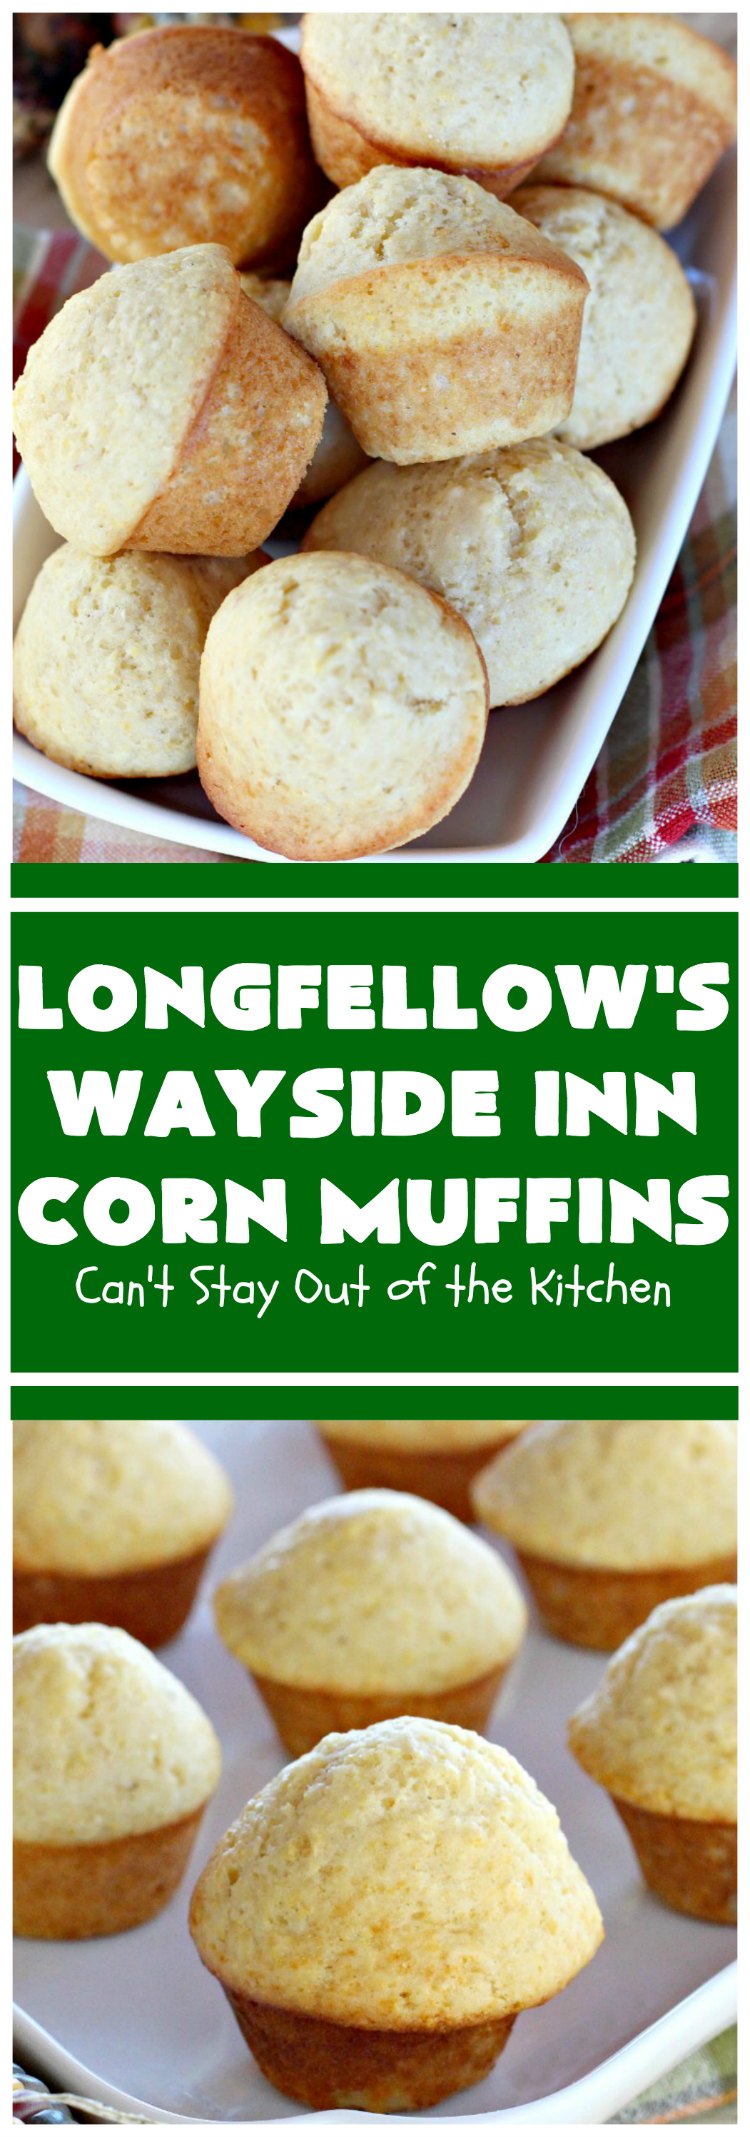 Longfellow's Wayside Inn Corn Muffins | Can't Stay Out of the Kitchen